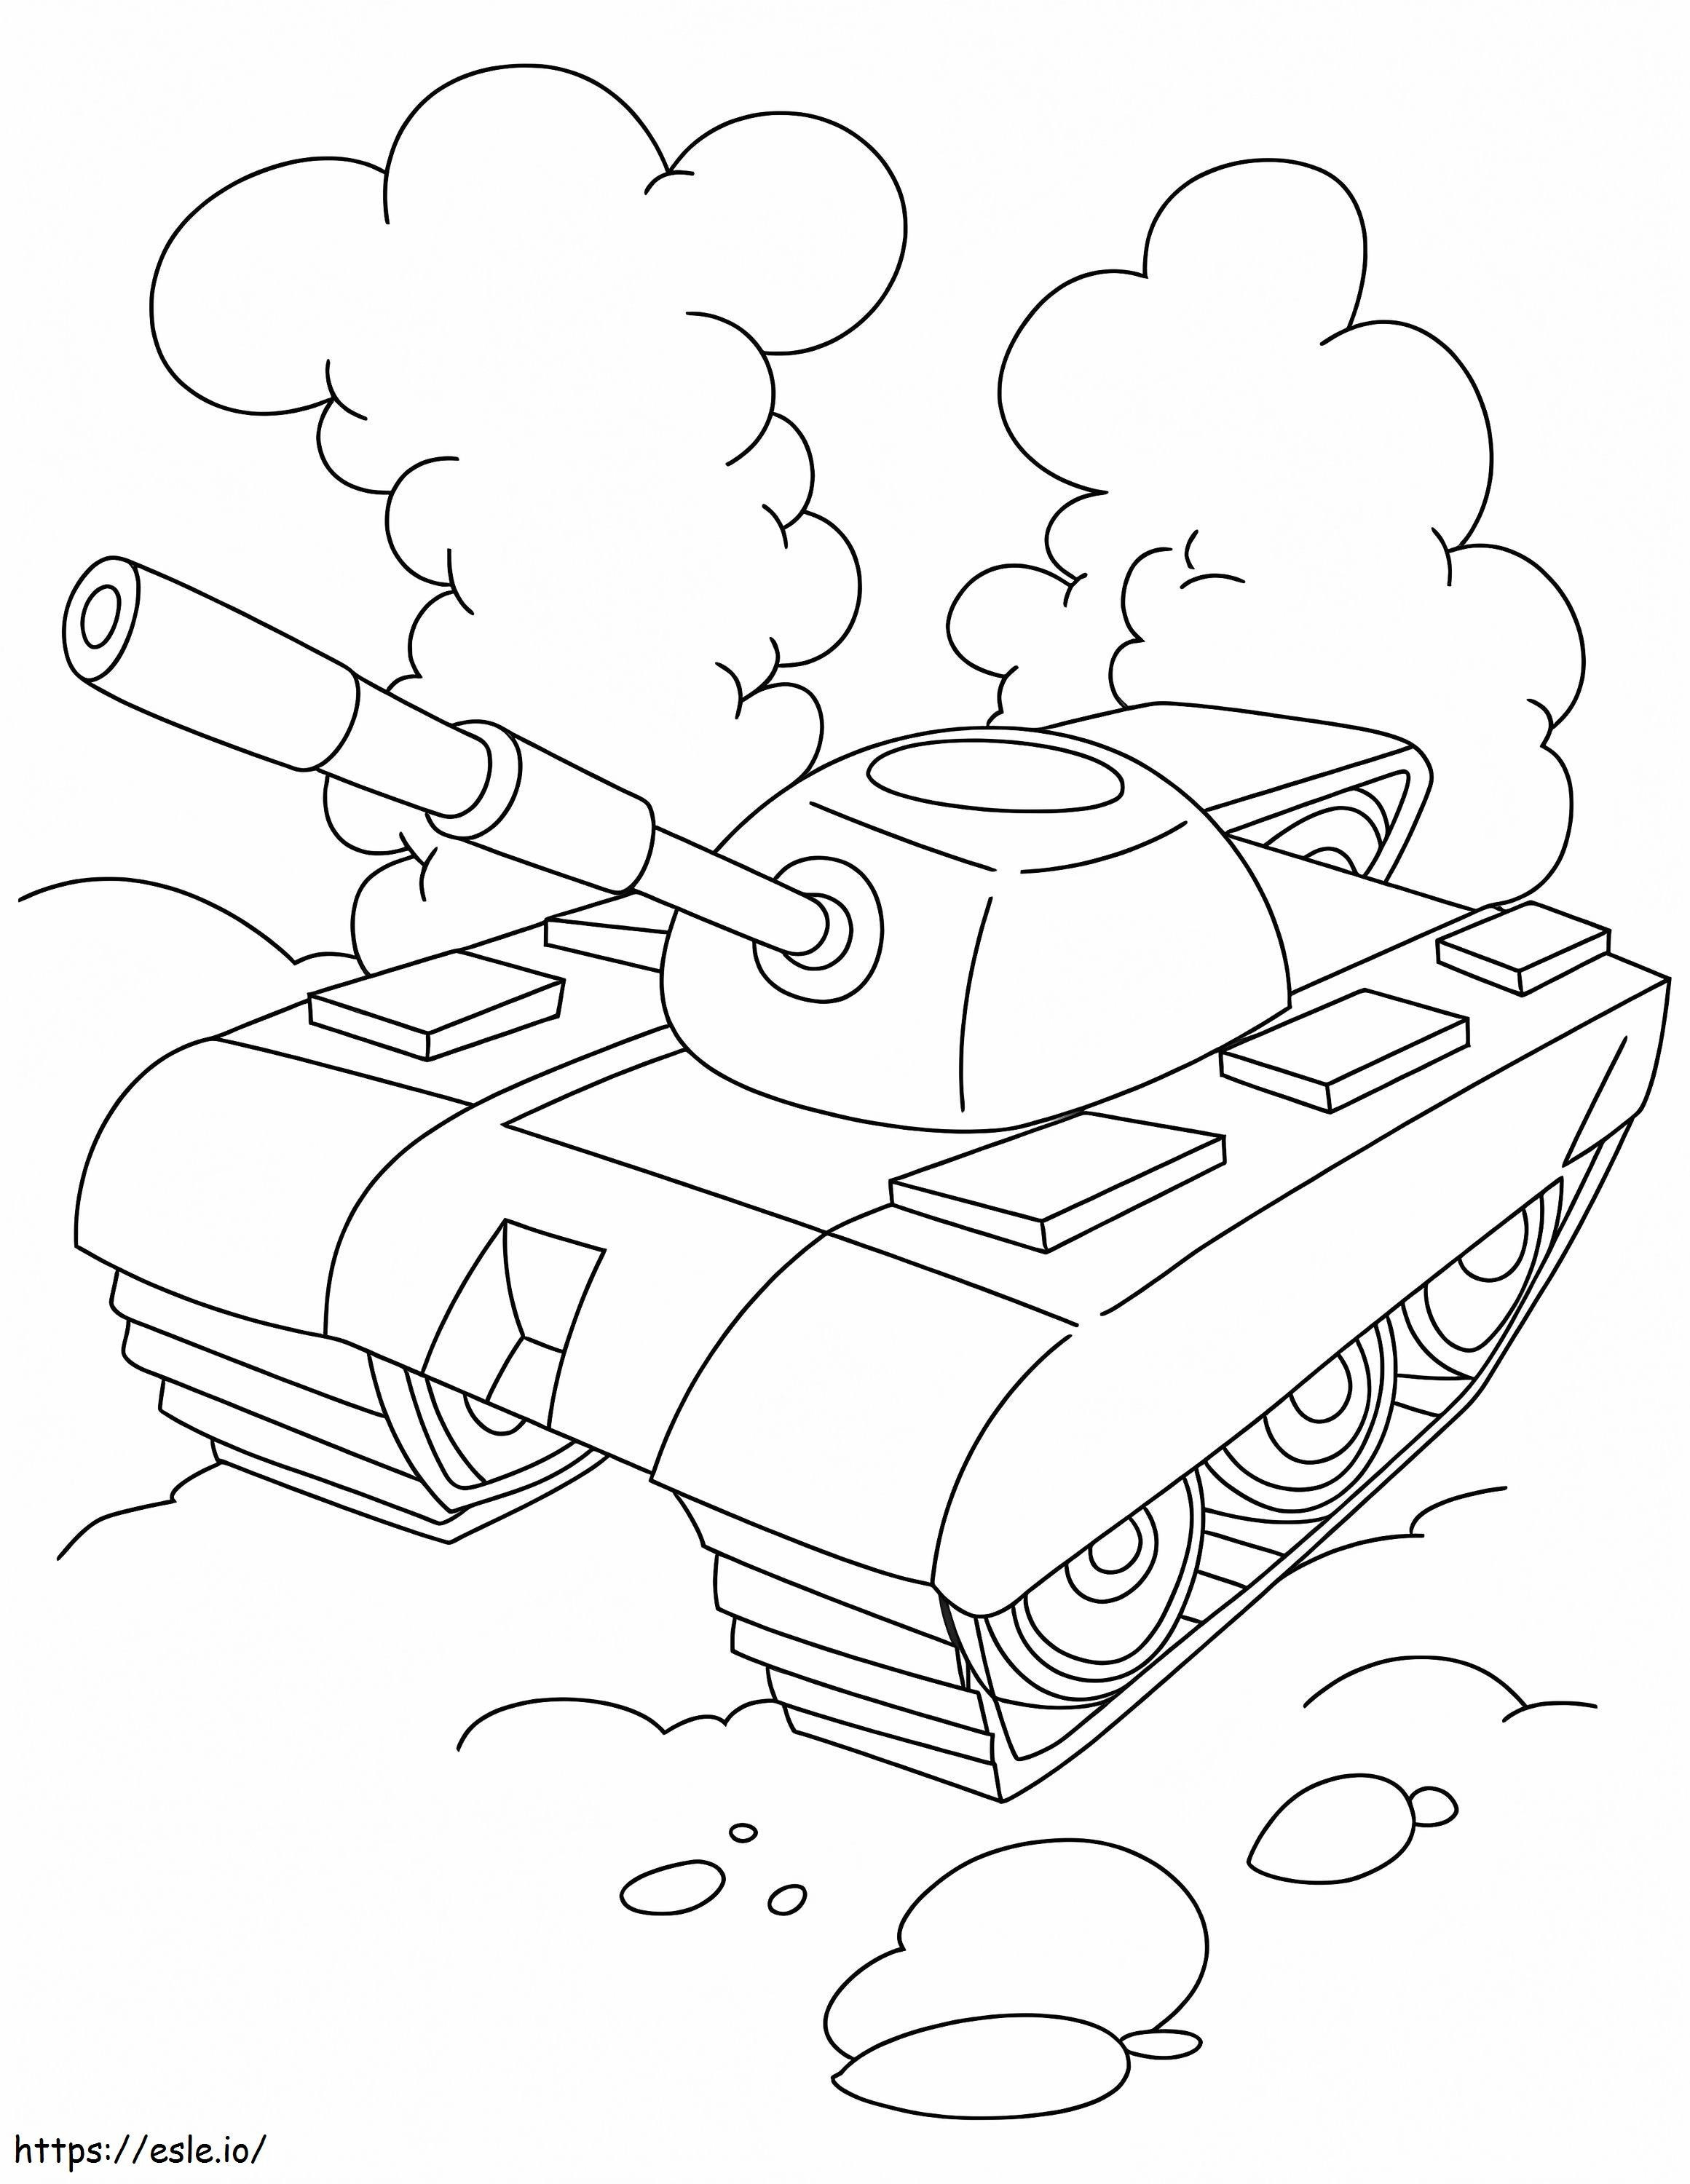 Awesome Tank coloring page